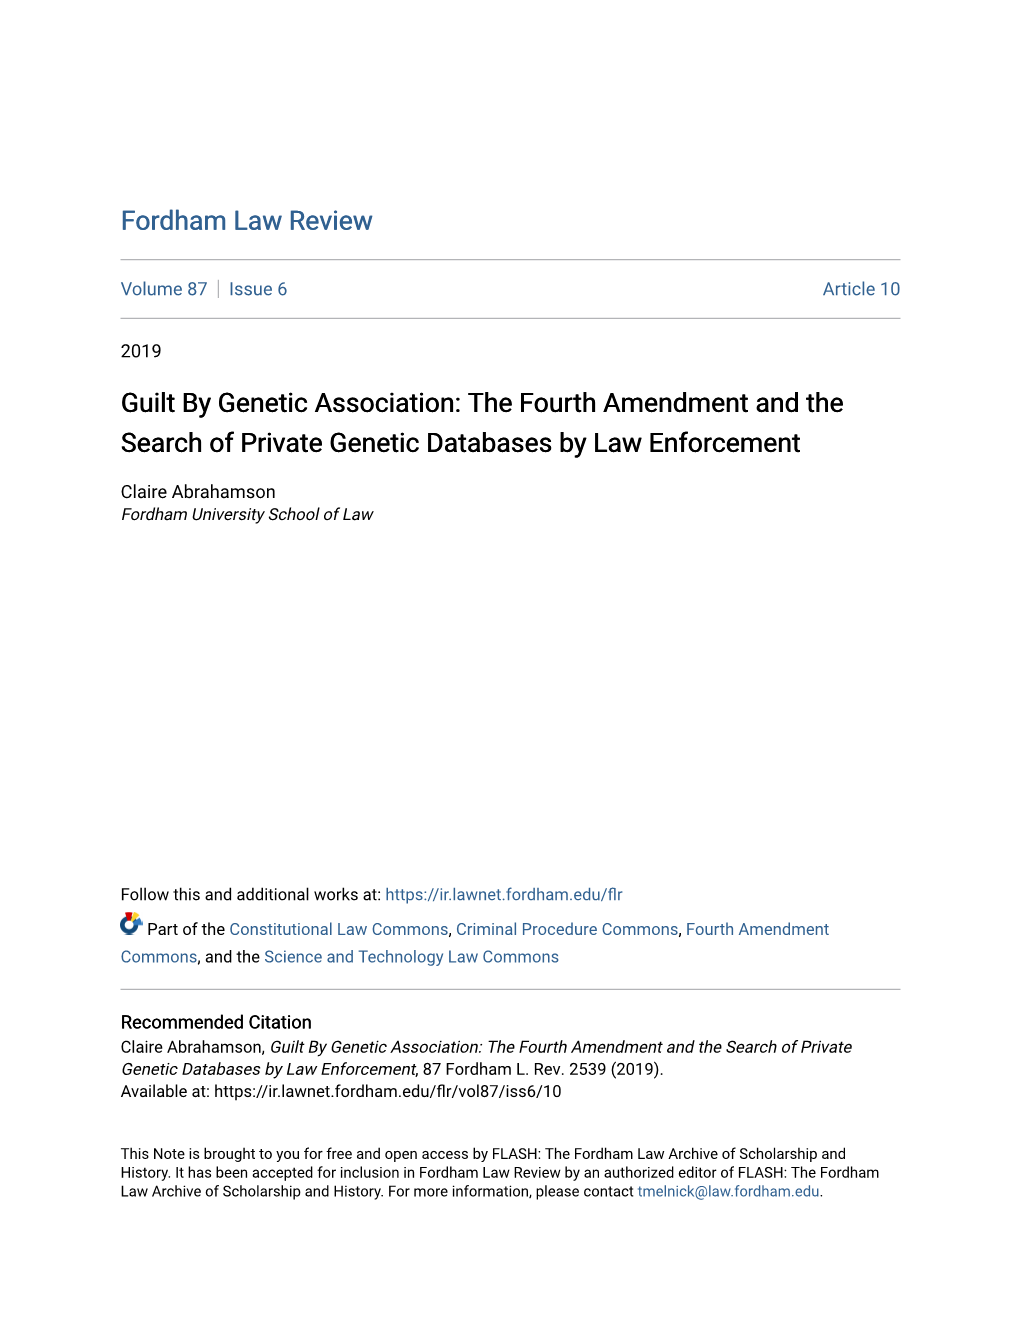 The Fourth Amendment and the Search of Private Genetic Databases by Law Enforcement